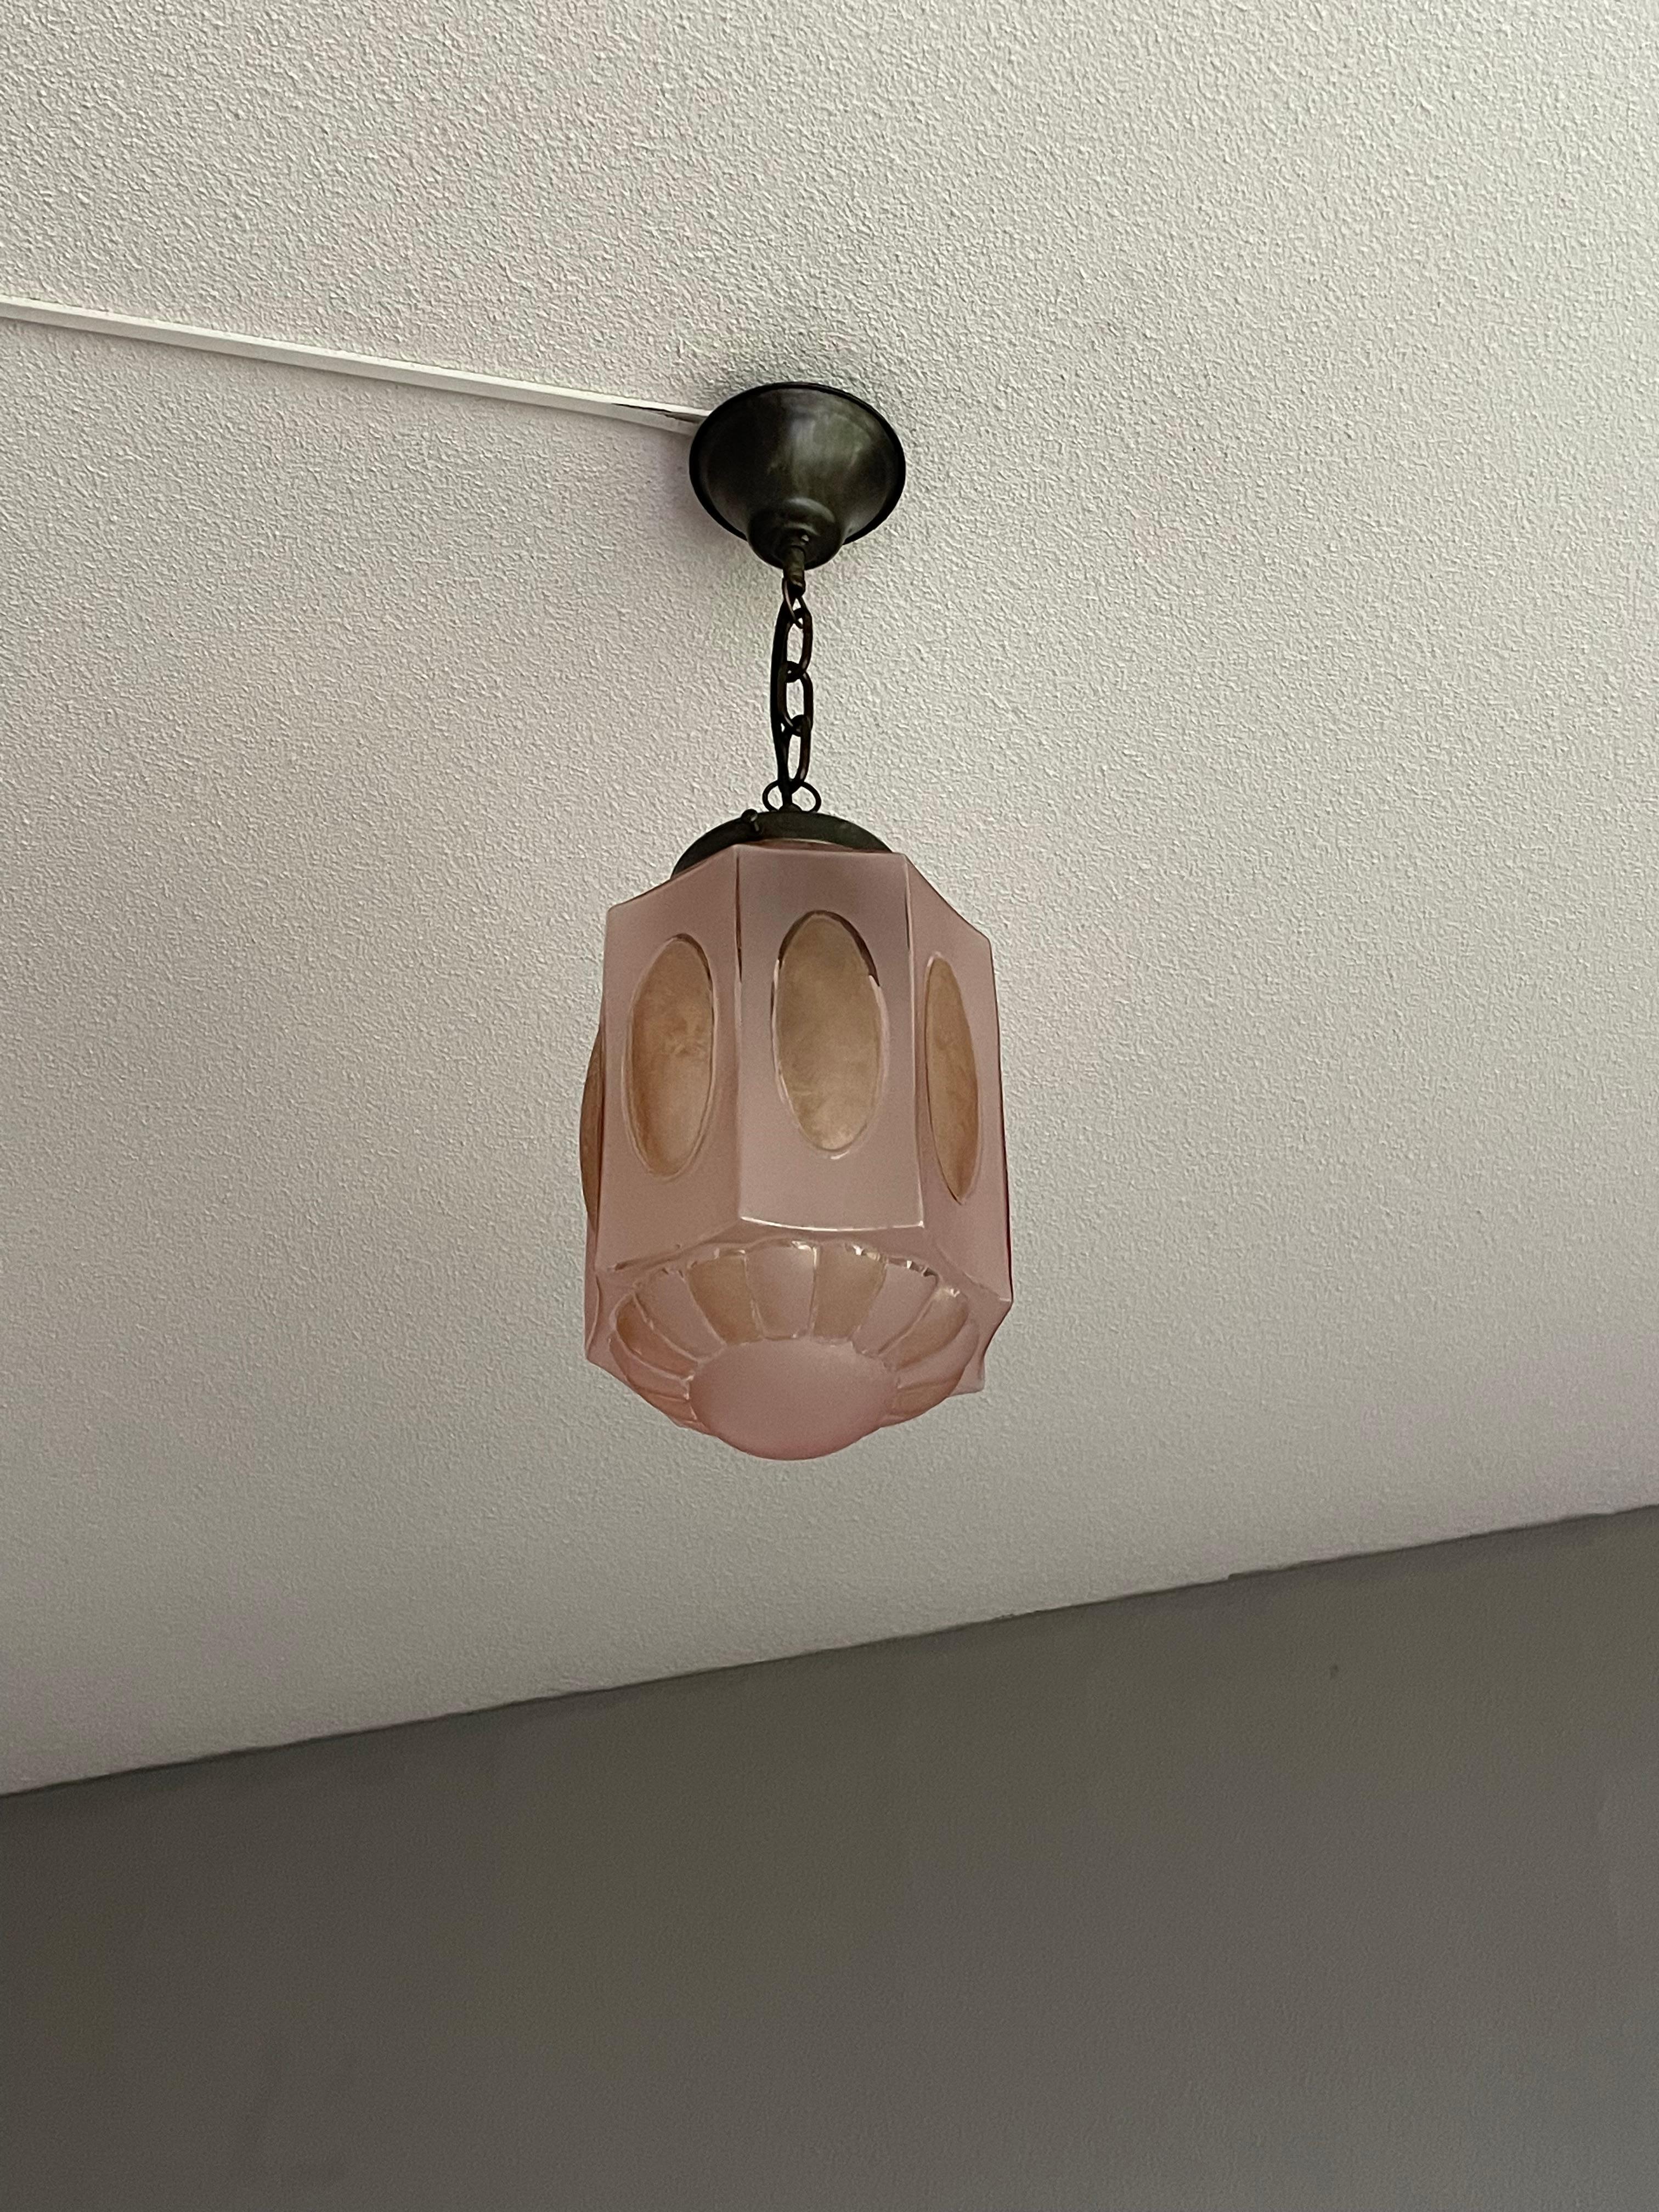 European Rare Art Deco Pendant Light Fixture w. Octagonal Satinated & Frosted Glass Shade For Sale